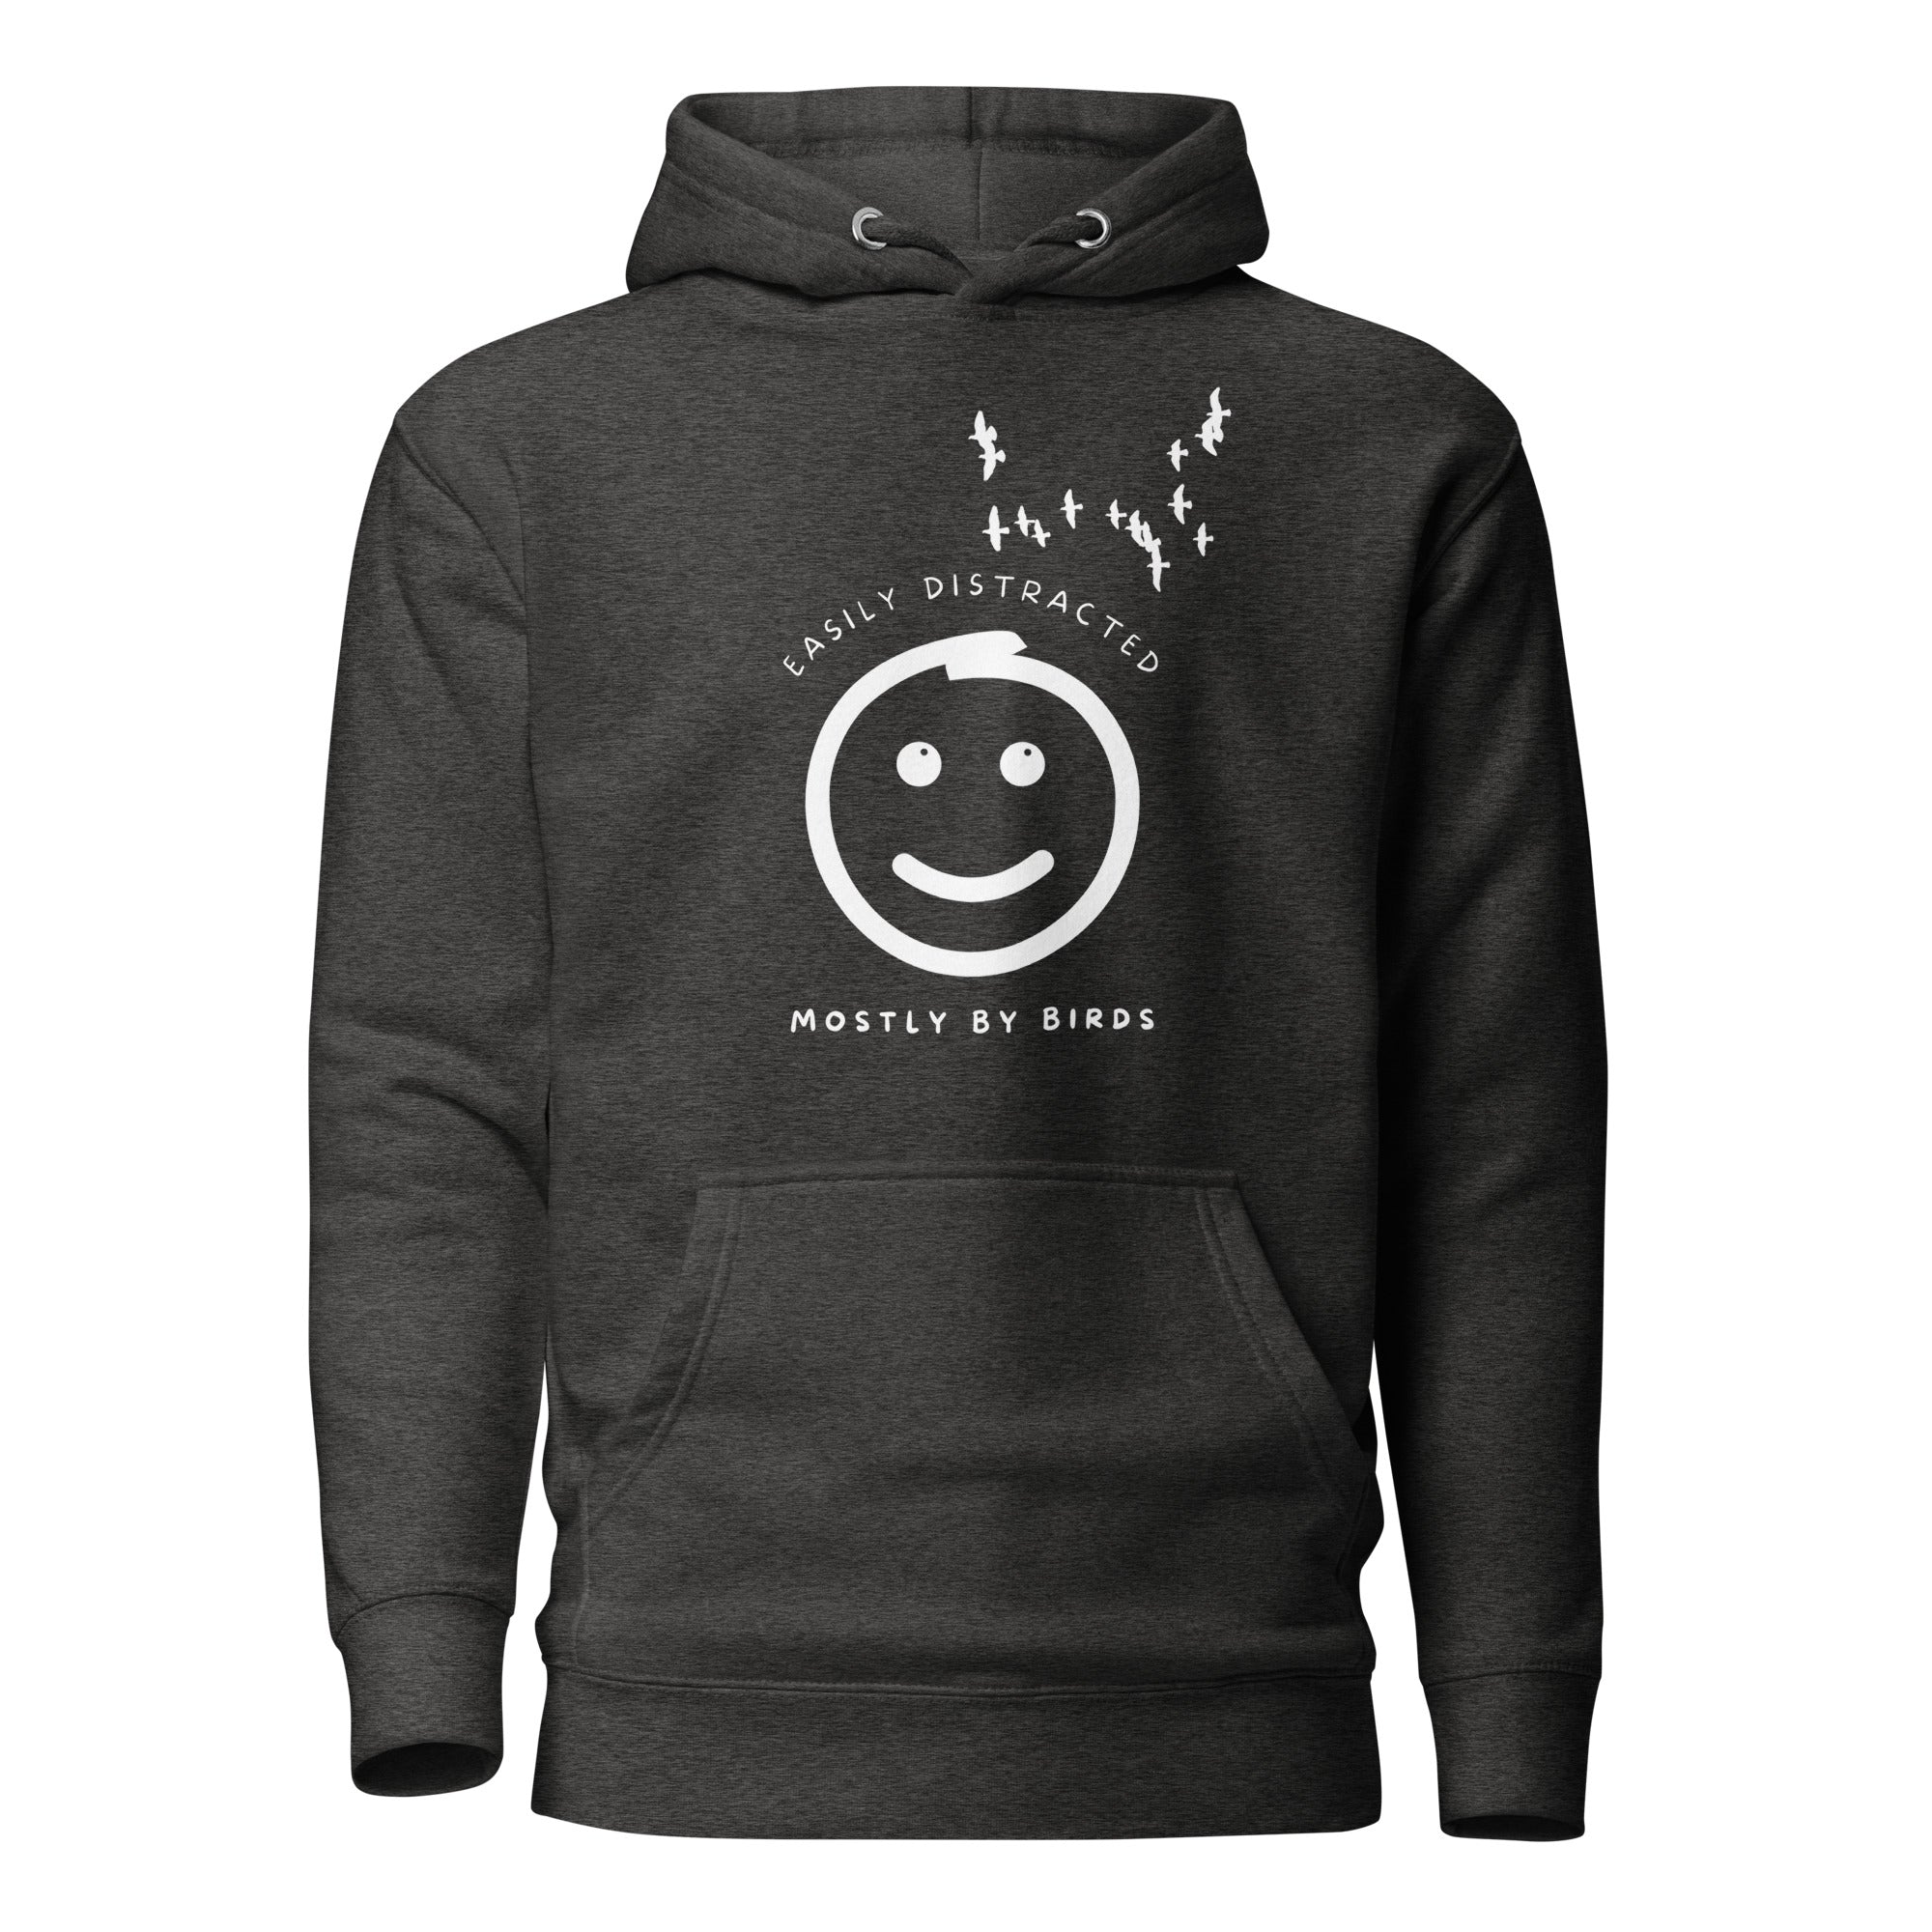 Heather gray hoodie with a smiley face looking off to the right at a flock of birds and the words Easily Distracted, Mostly By Birds on the front.